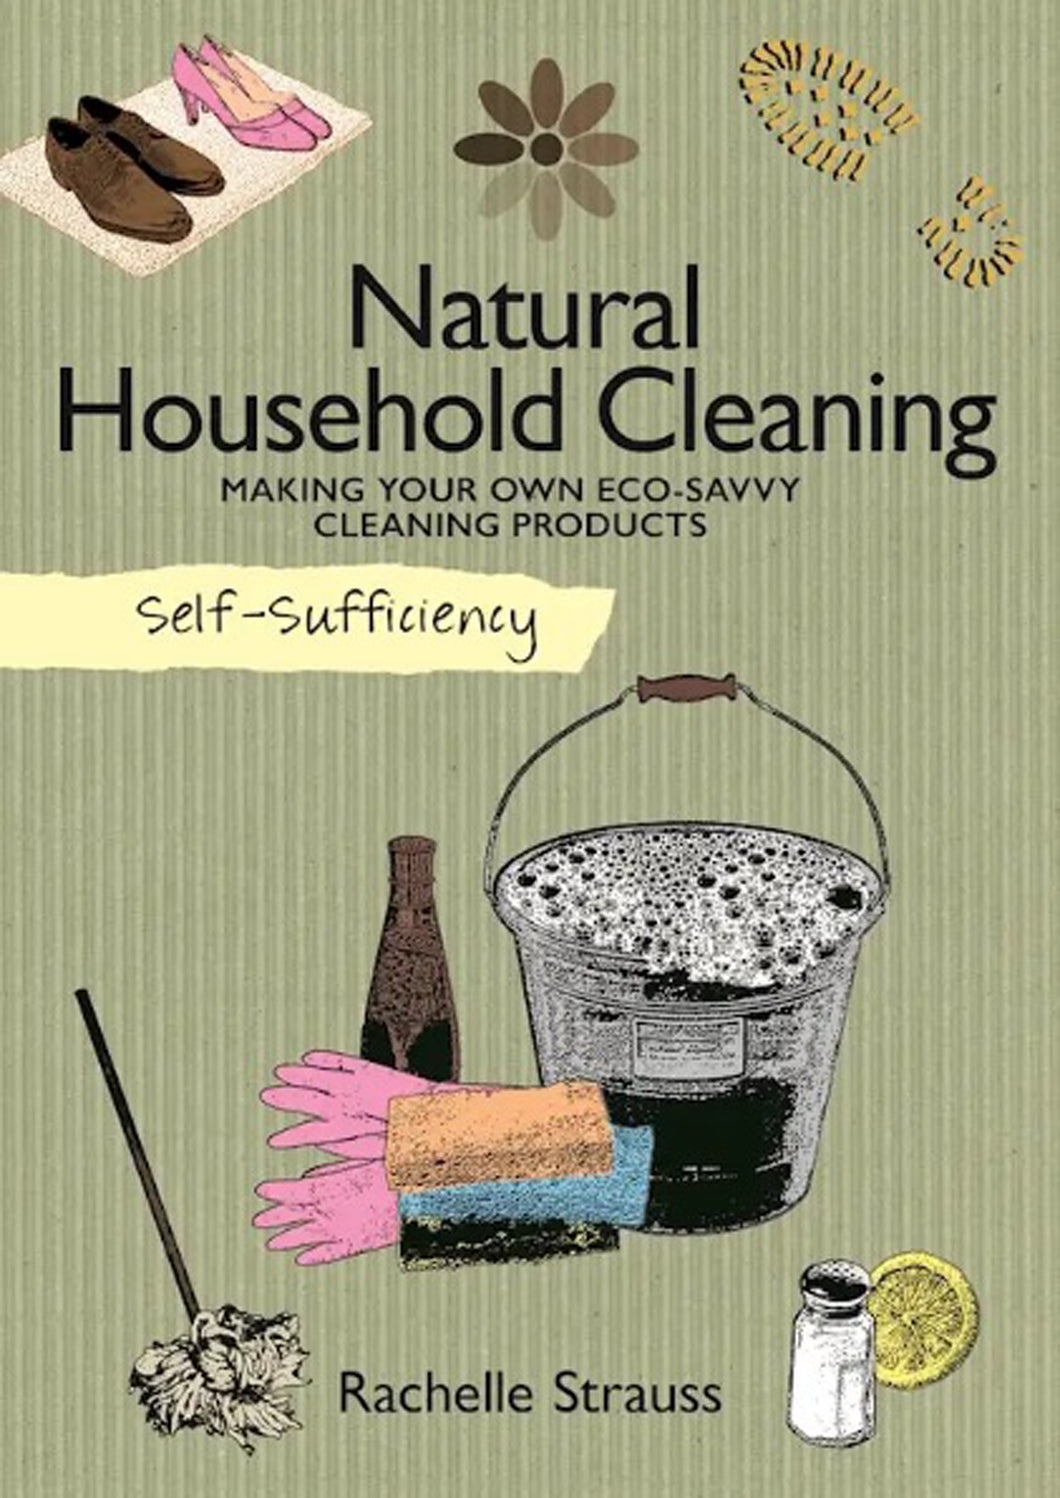 NATURAL HOUSEHOLD CLEANING: MAKING YOUR OWN ECO-SAVVY CLEANING PRODUCTS